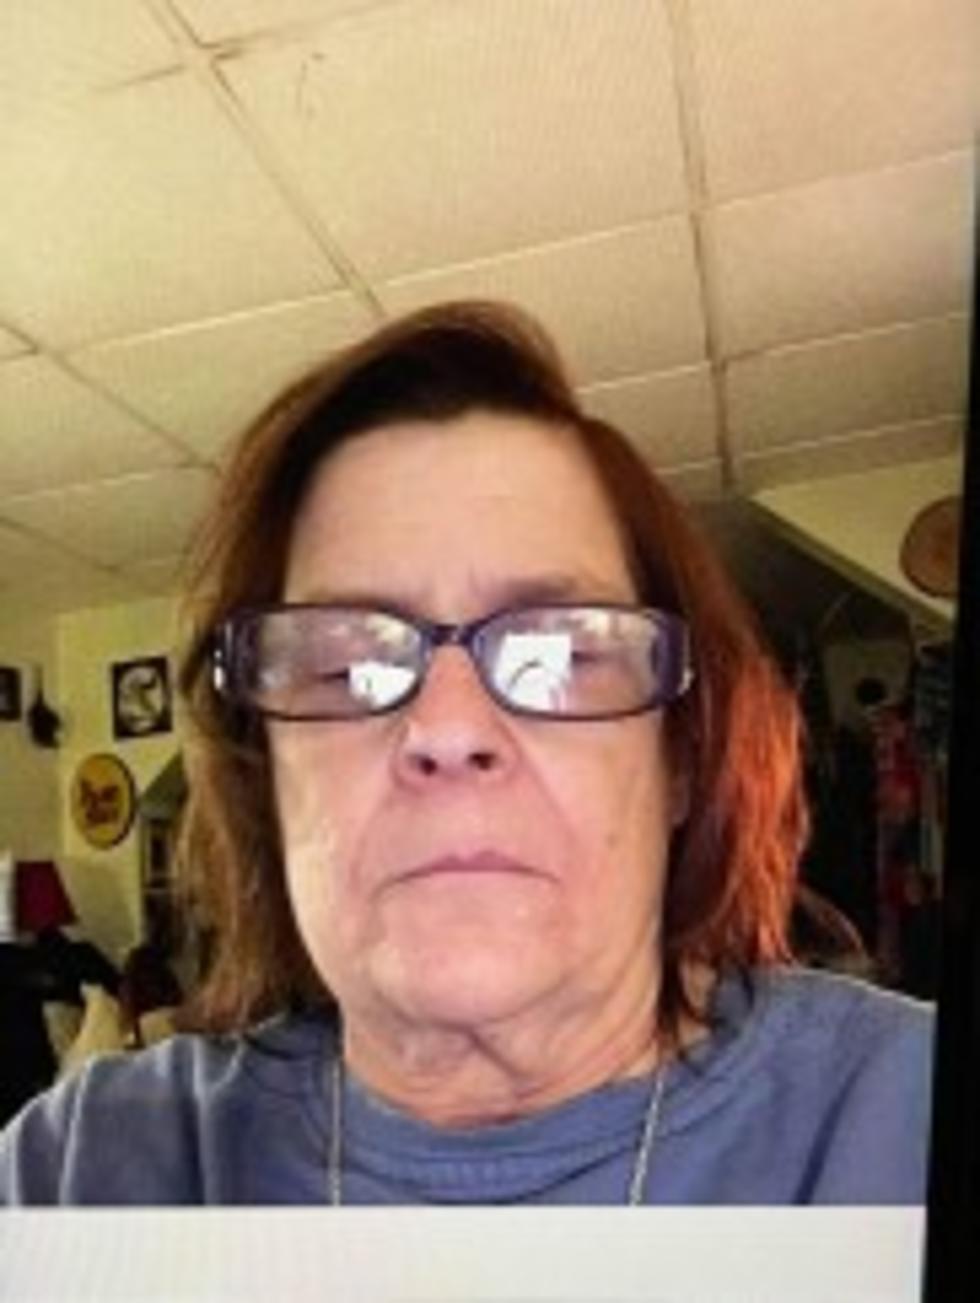 Vulnerable Adult Missing in Tioga County